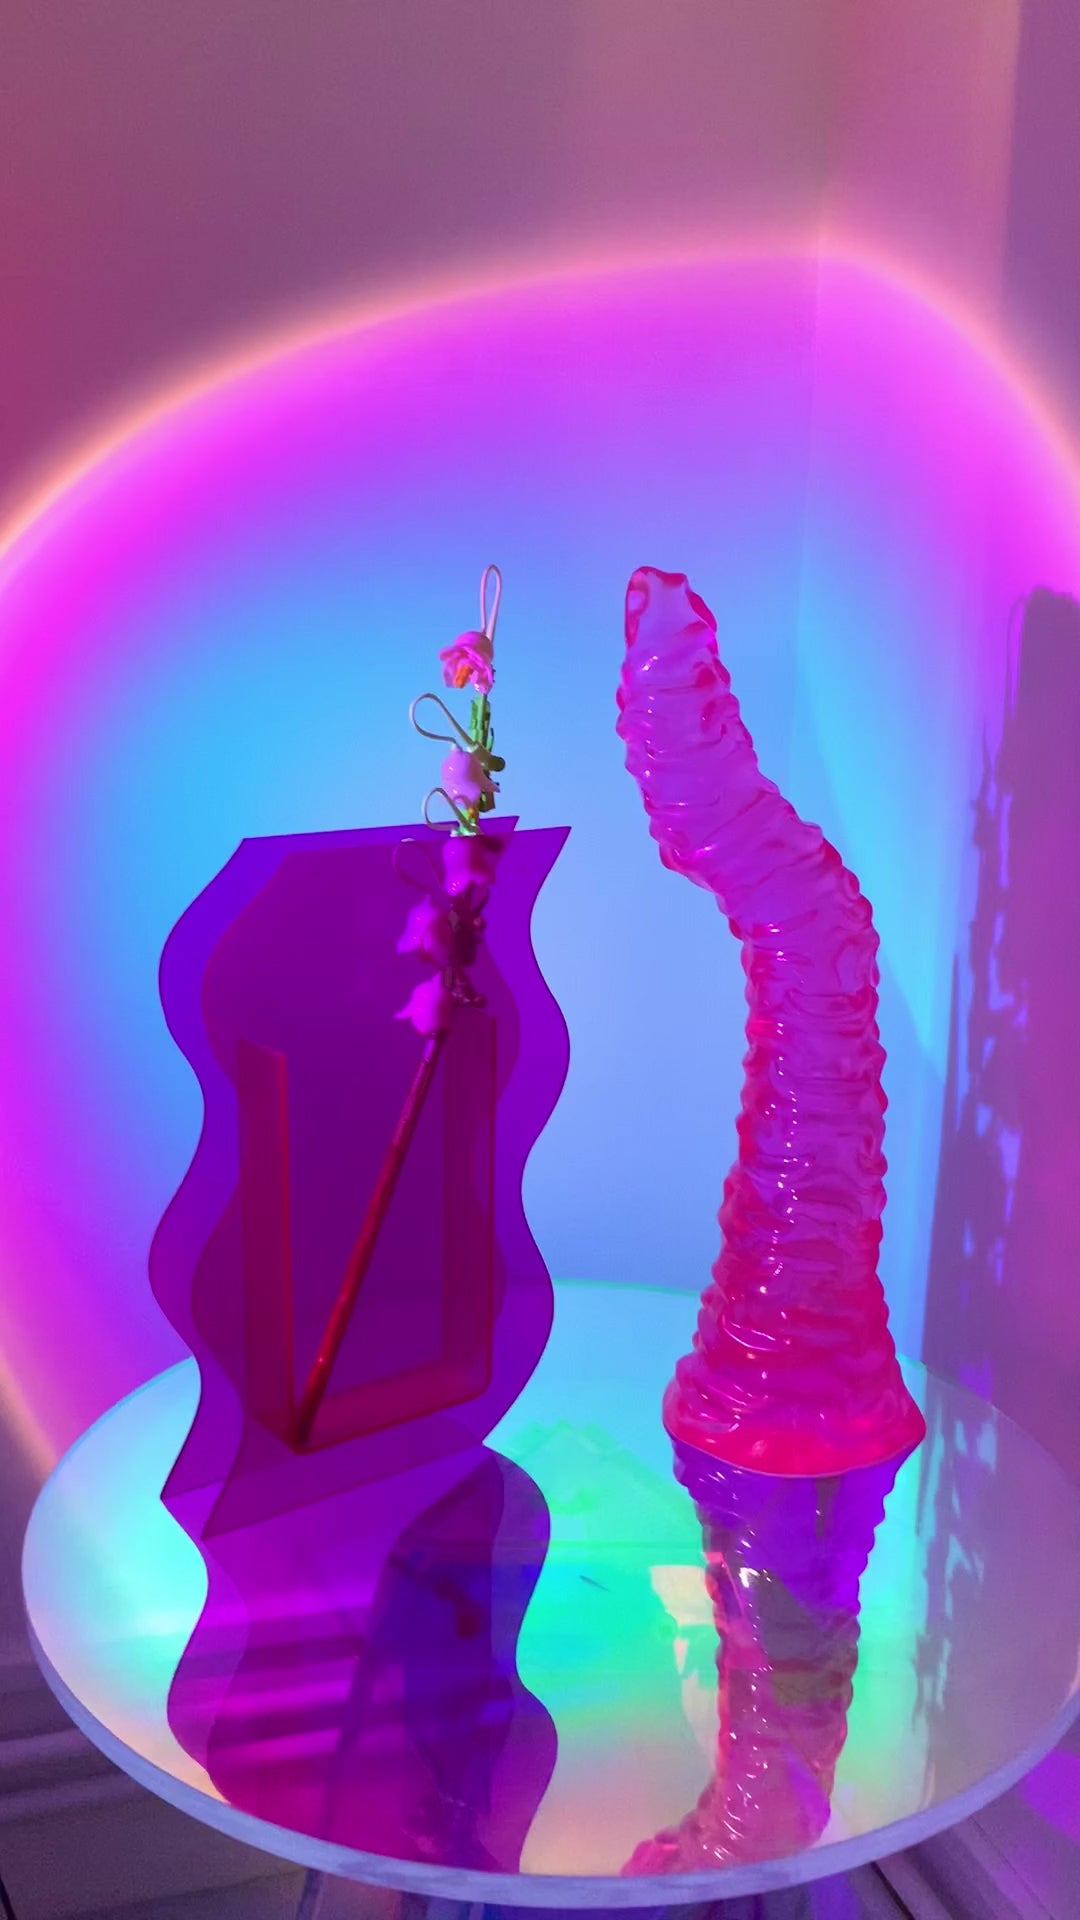 Pink big hentai fantasy dildo with strong suction cup